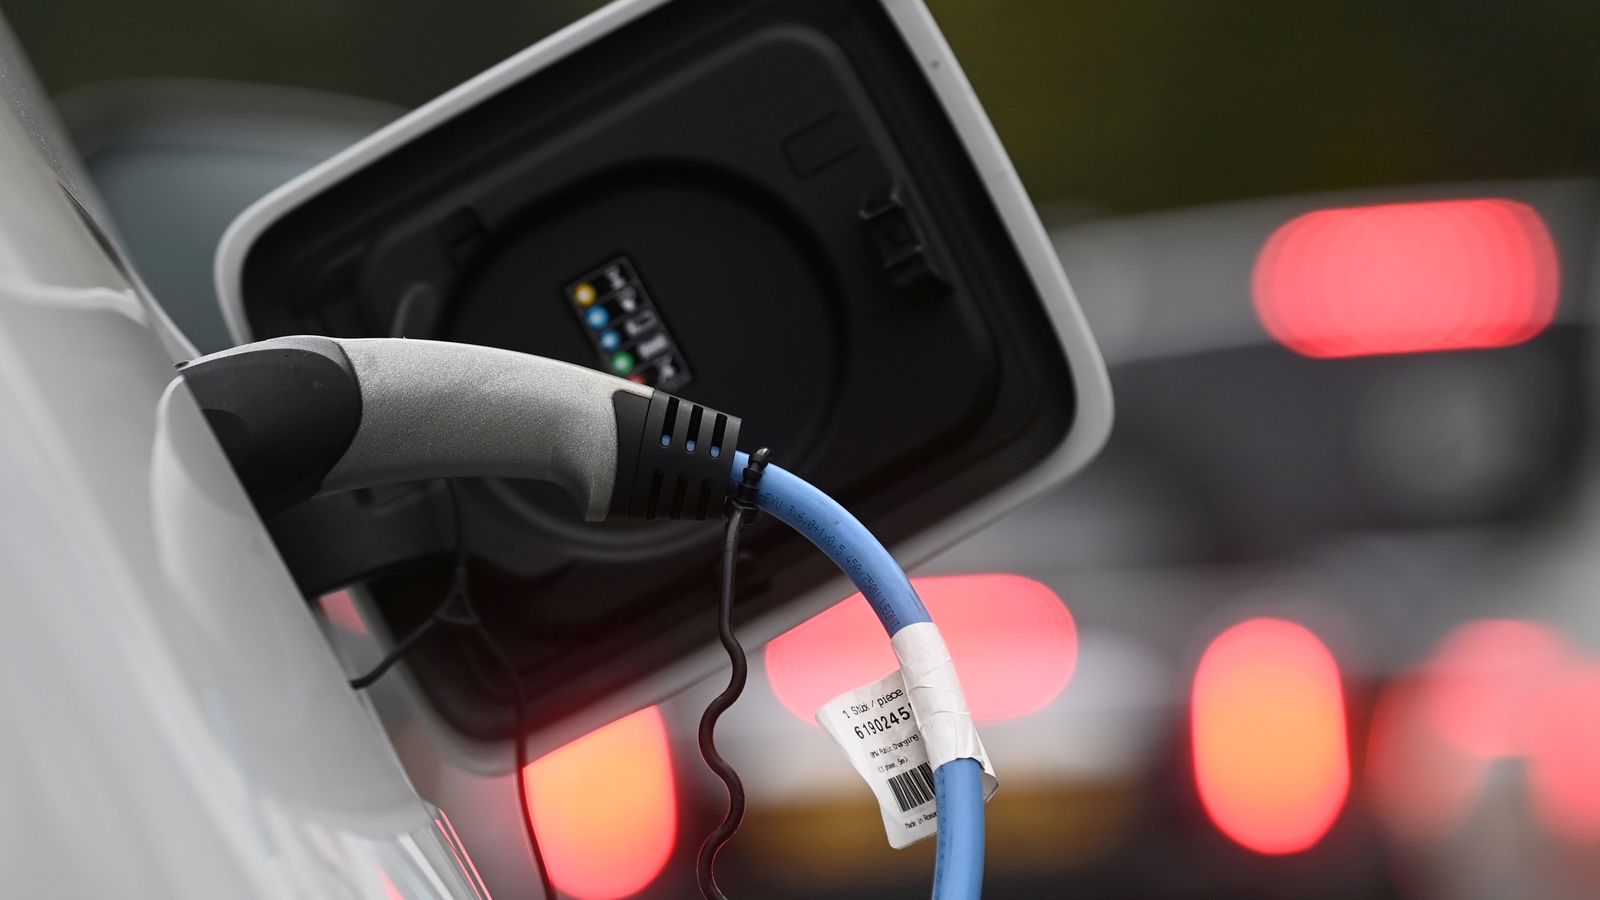 Charging EV batteries too quickly can degrade their performance, study